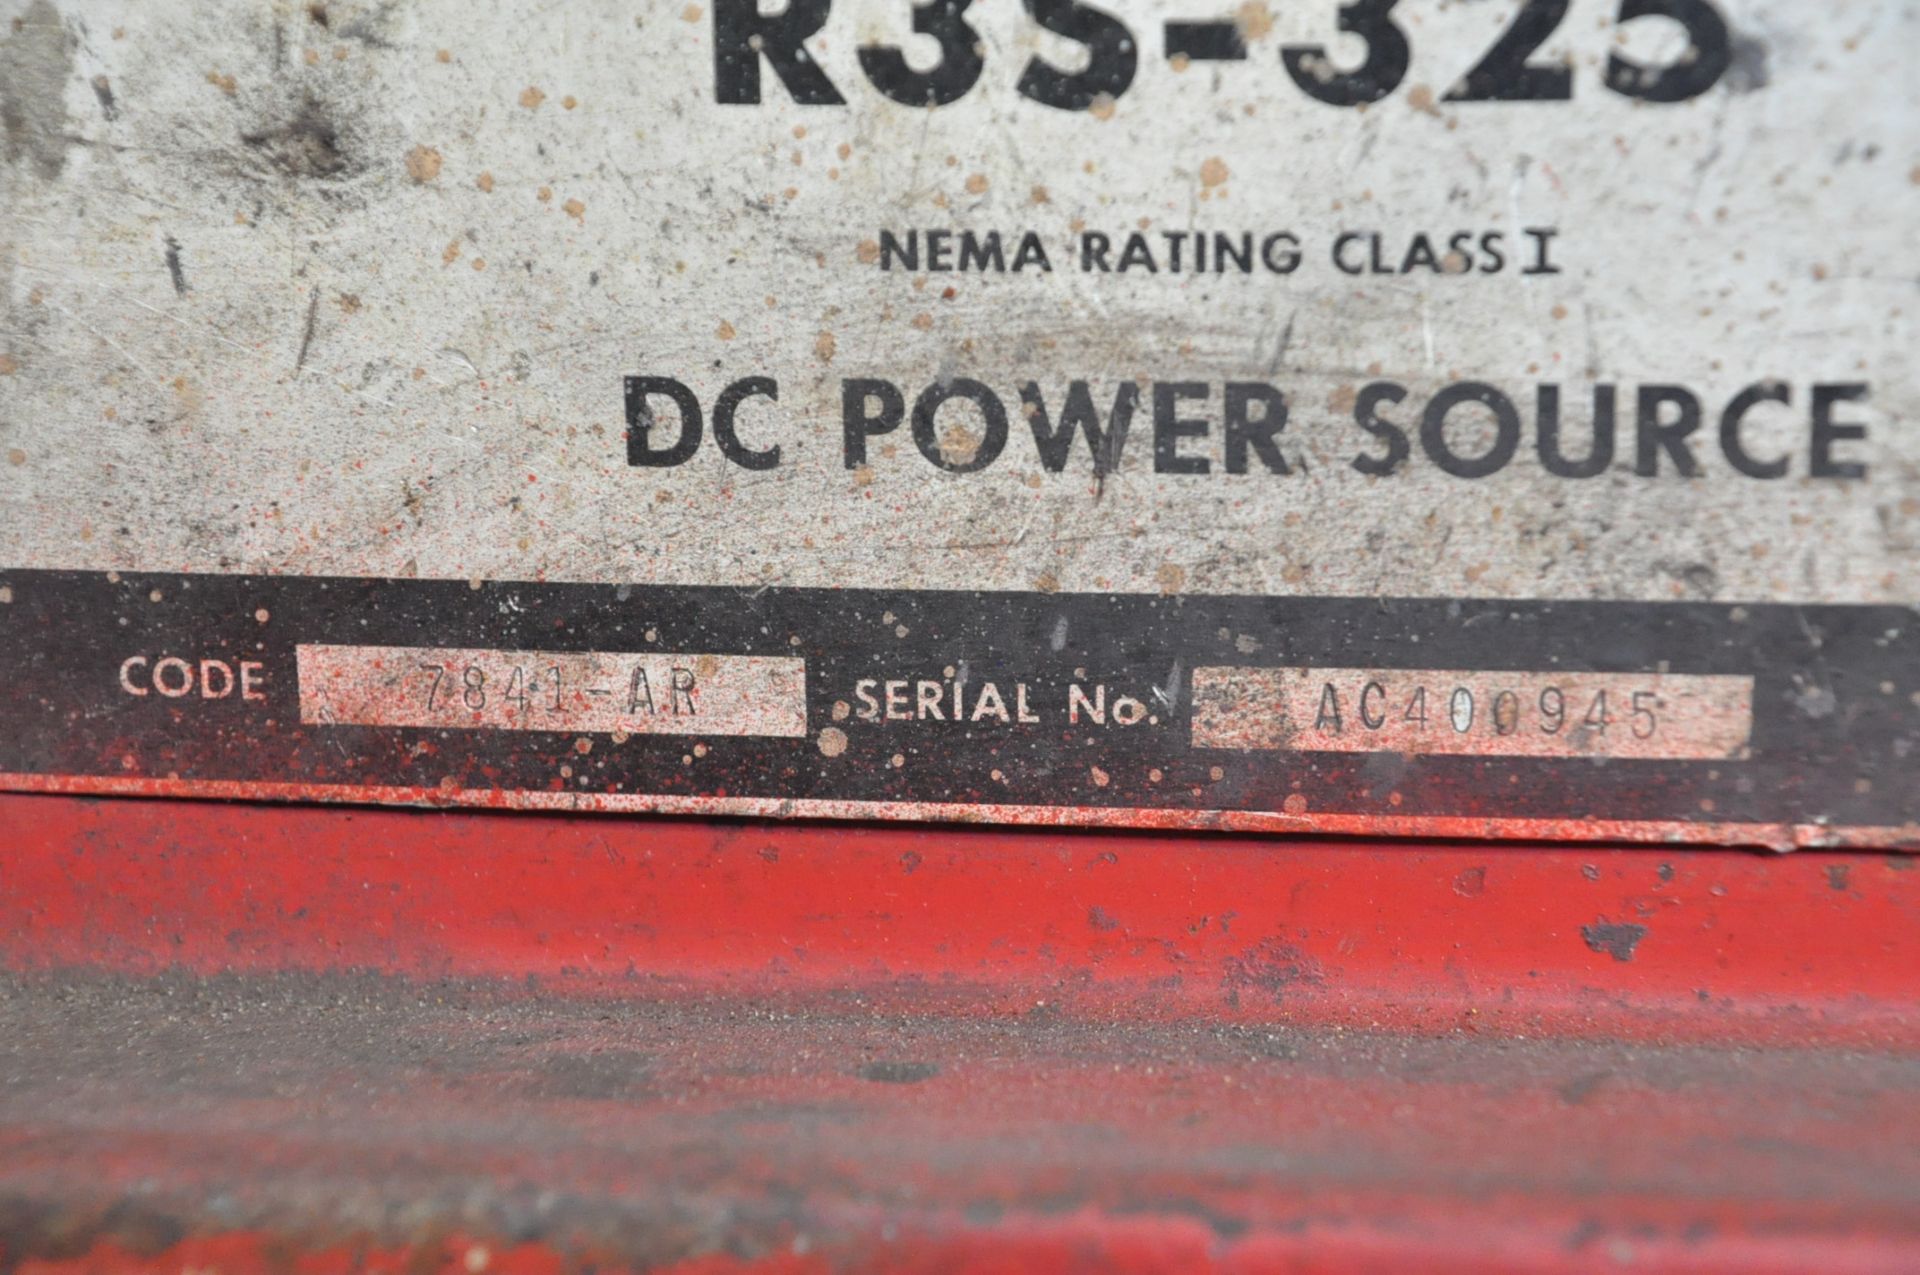 Lincoln Idealarc R3S-325, 325-Amp Capacity DC Arc Welding Power Source, S/n AC400945, with Lincoln - Image 8 of 8